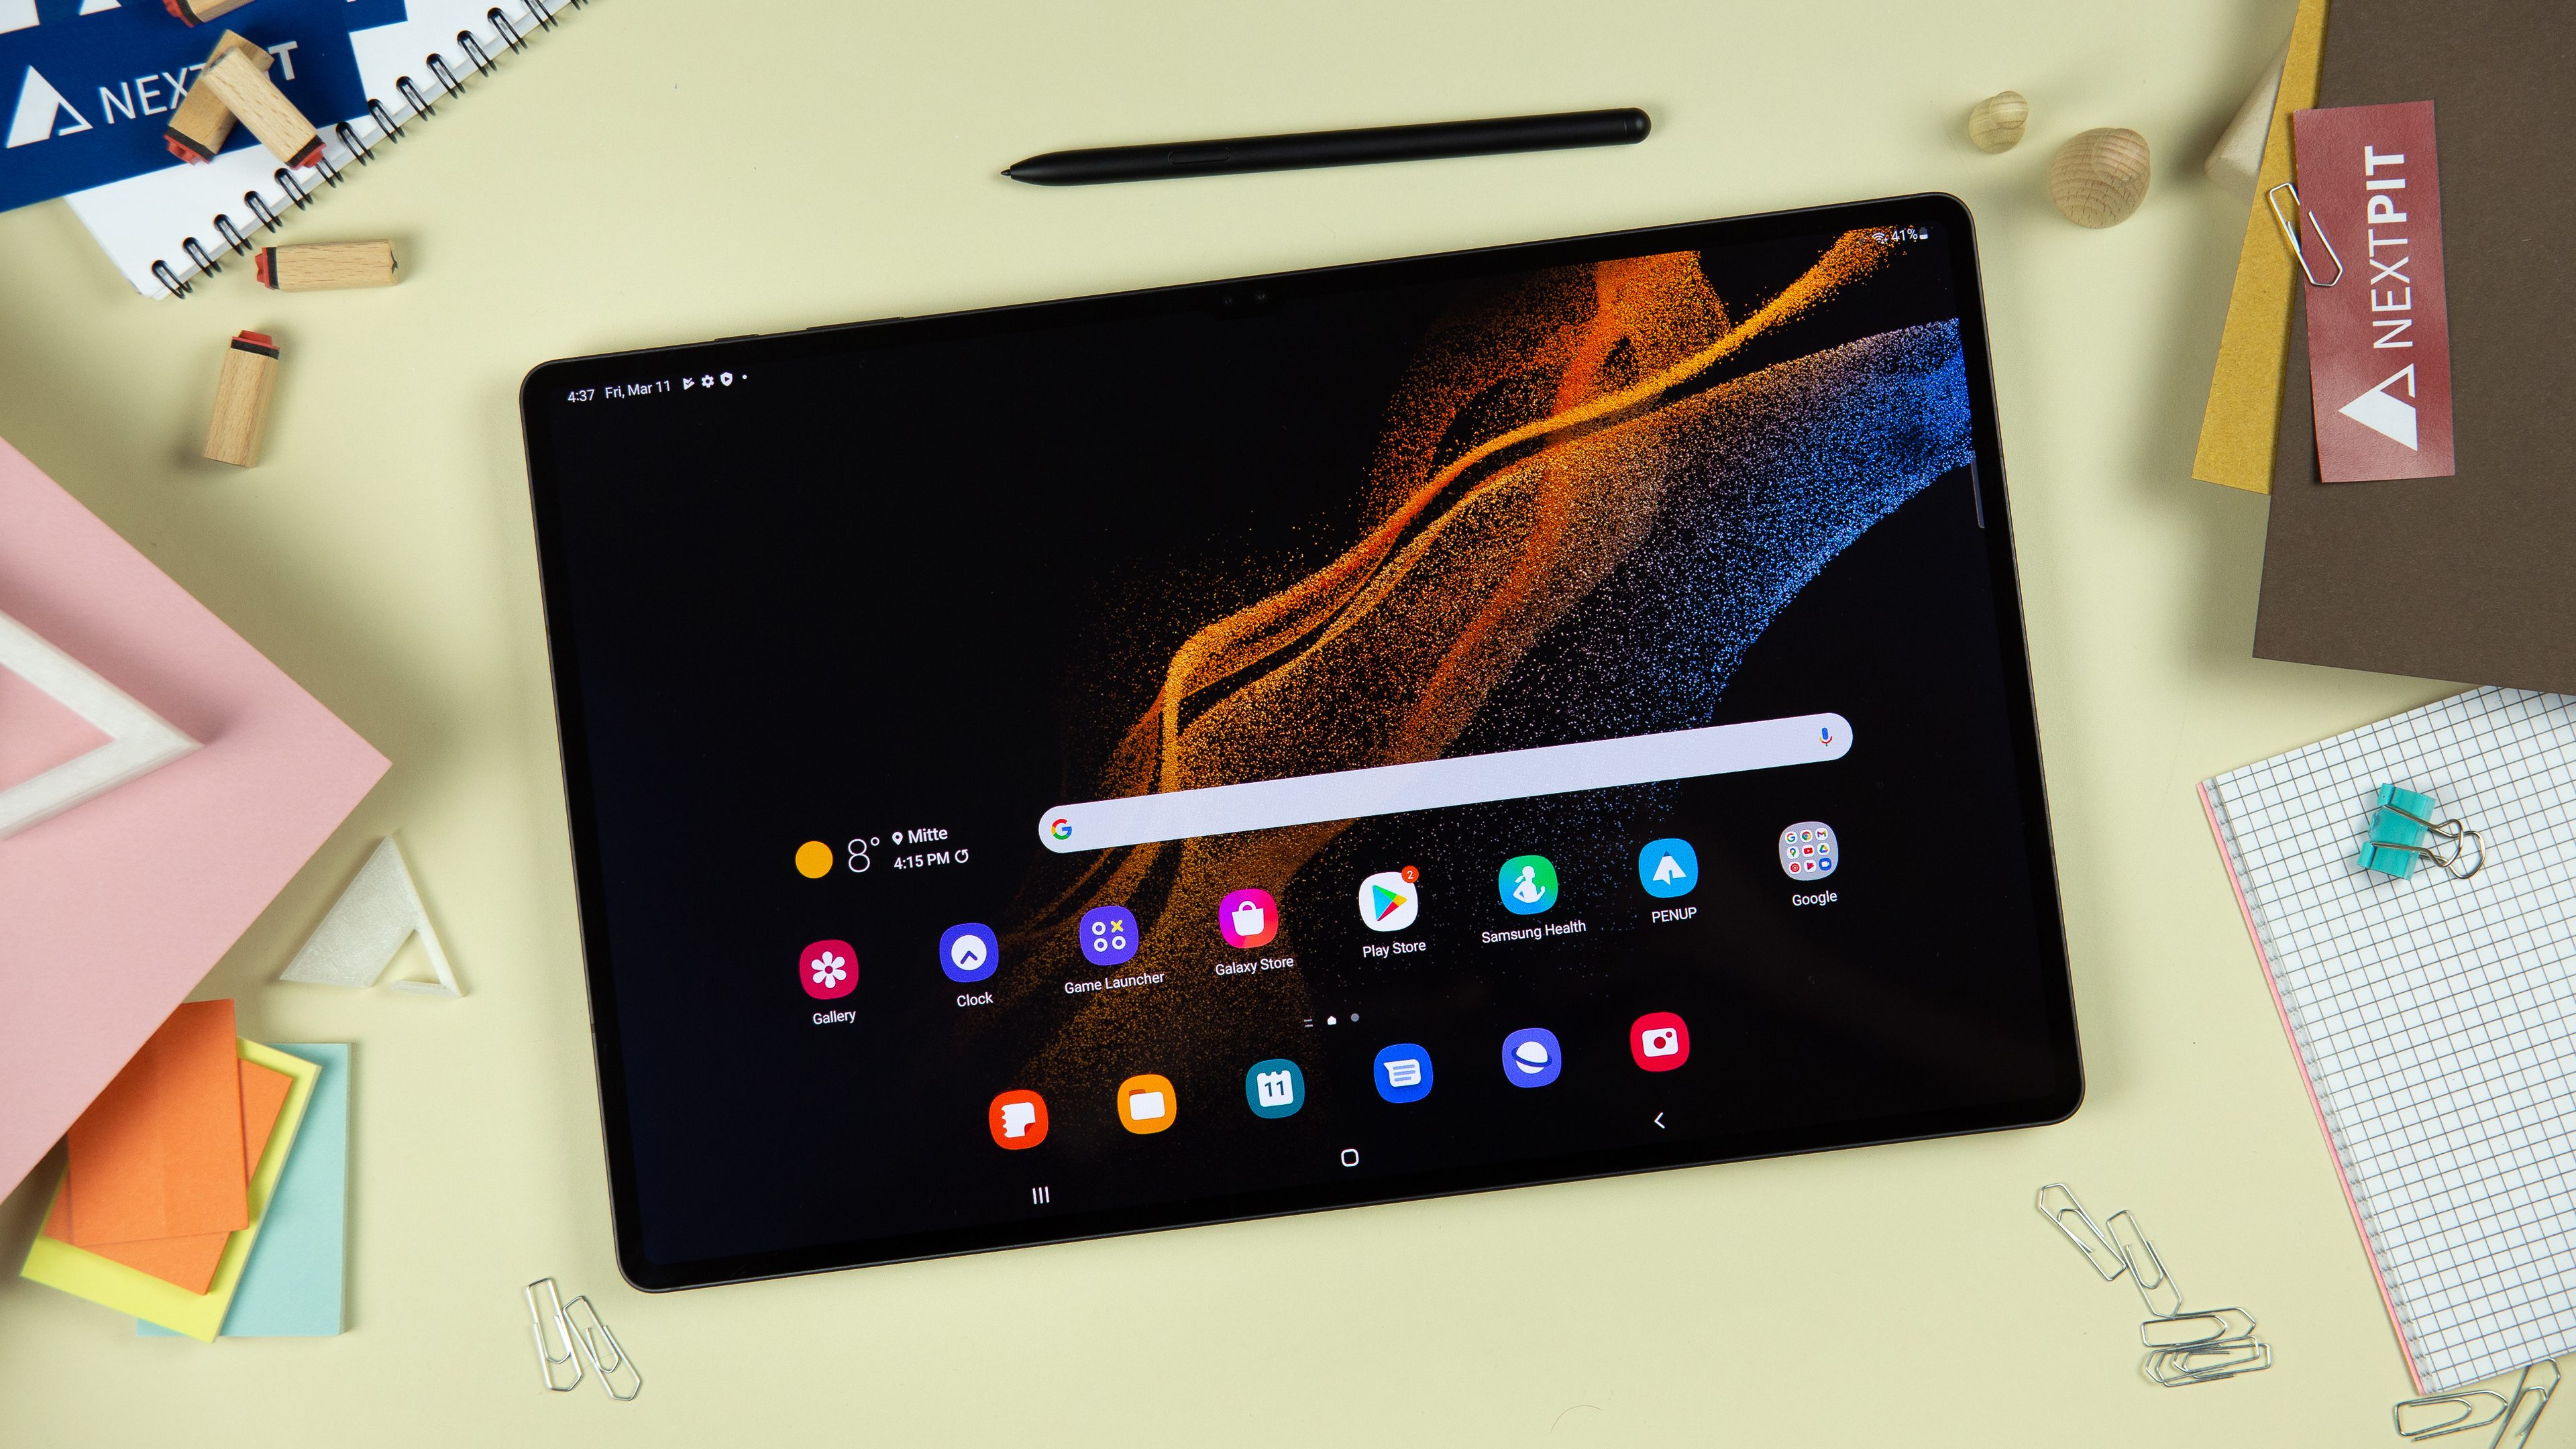 Krankzinnigheid rook Bezwaar Samsung Galaxy Tab S8 Ultra review: The best Android tablet in the world |  NextPit